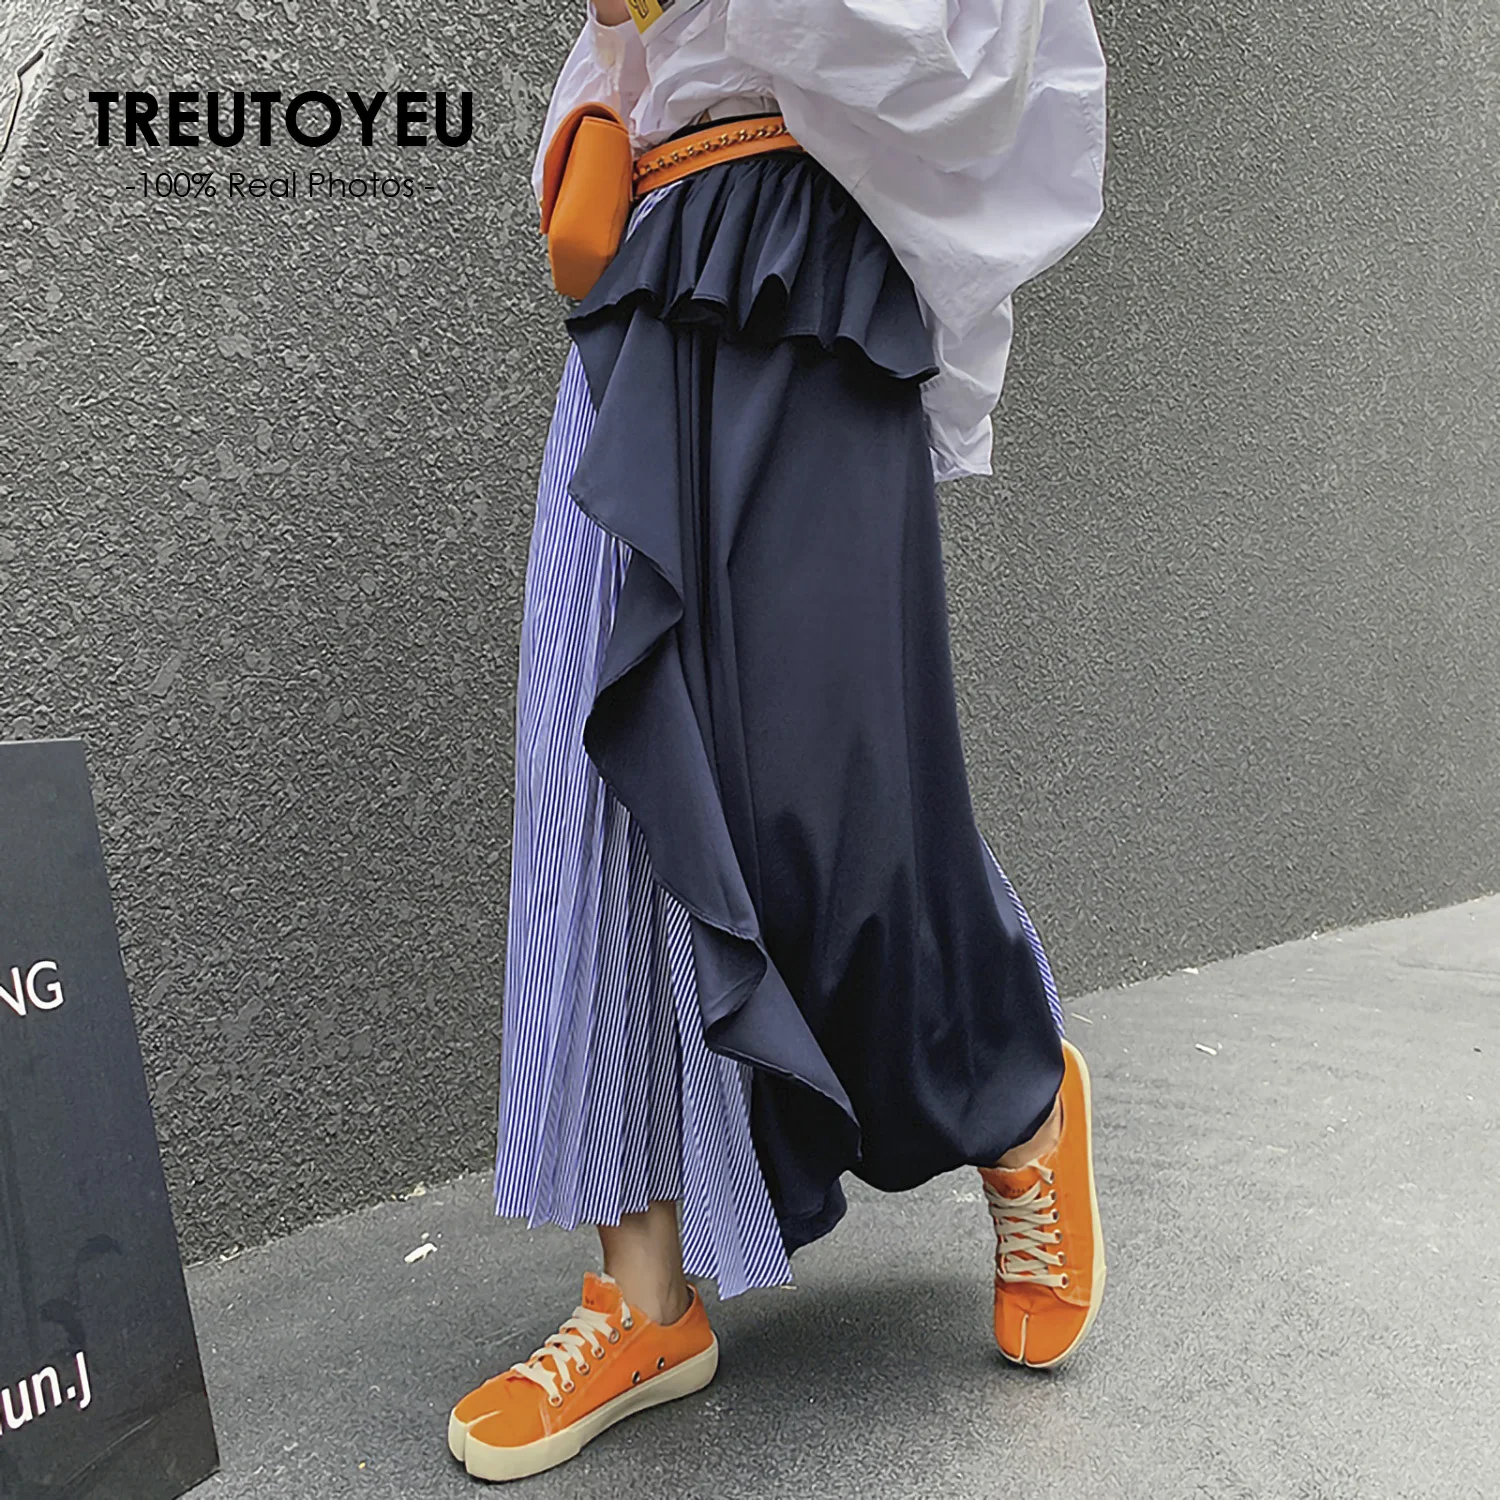 Korean Style Pleated Skirt Maxi Long Skirts for Women Black and Blue Striped High Waist Japanese Fashion Jupe Mall Goth Falda